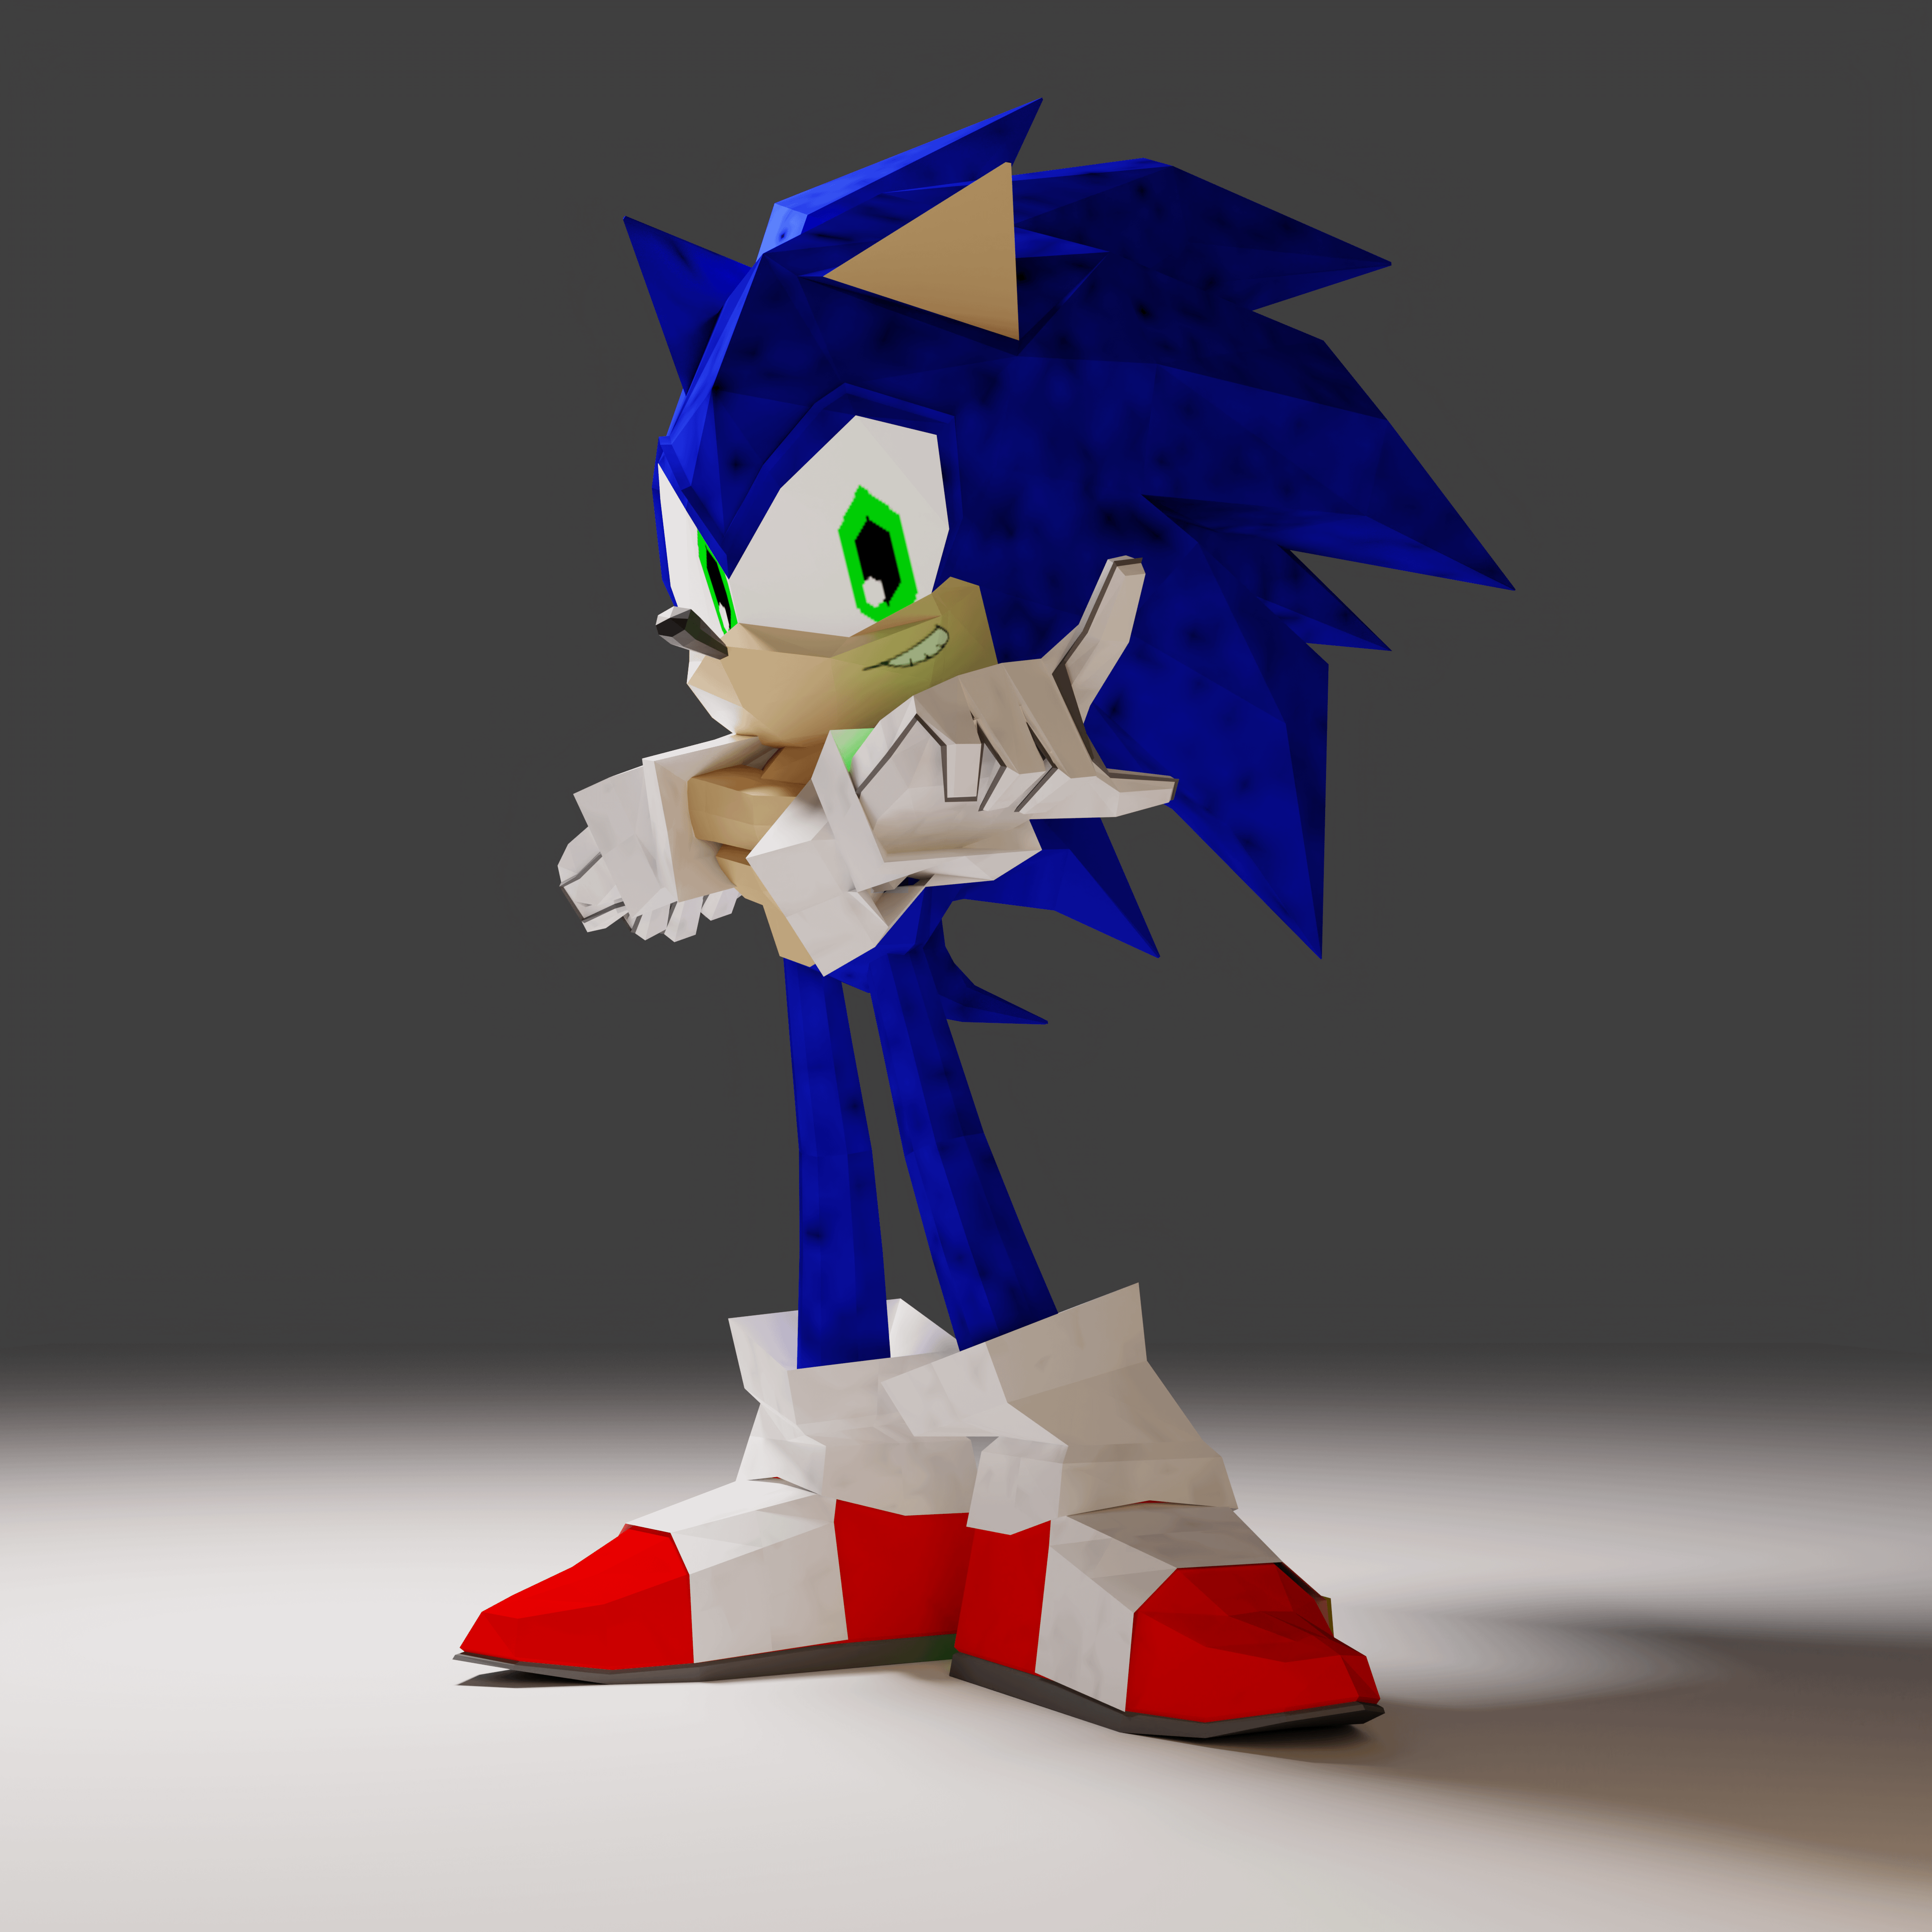 Low poly Sonic the Hedgehog - Low poly, Sonic